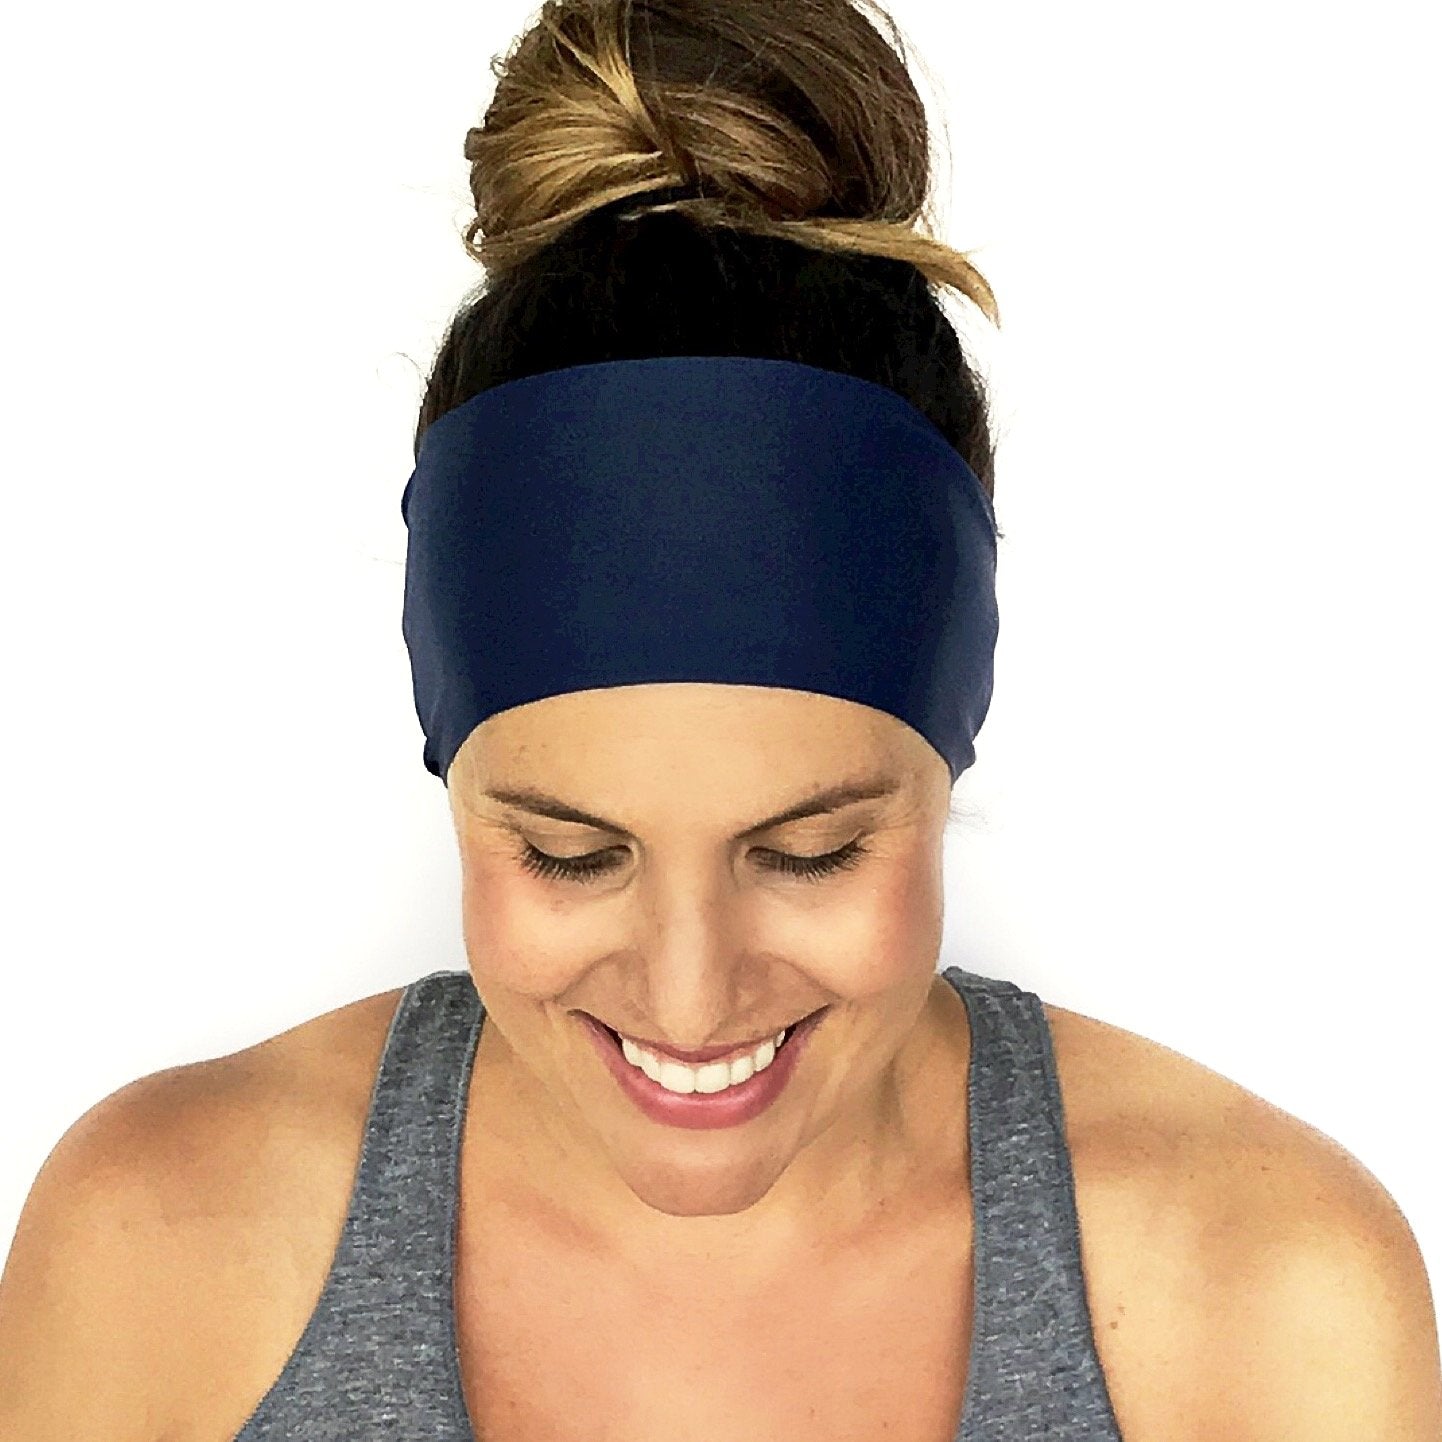 Solid Navy Workout Headband - True North Collection